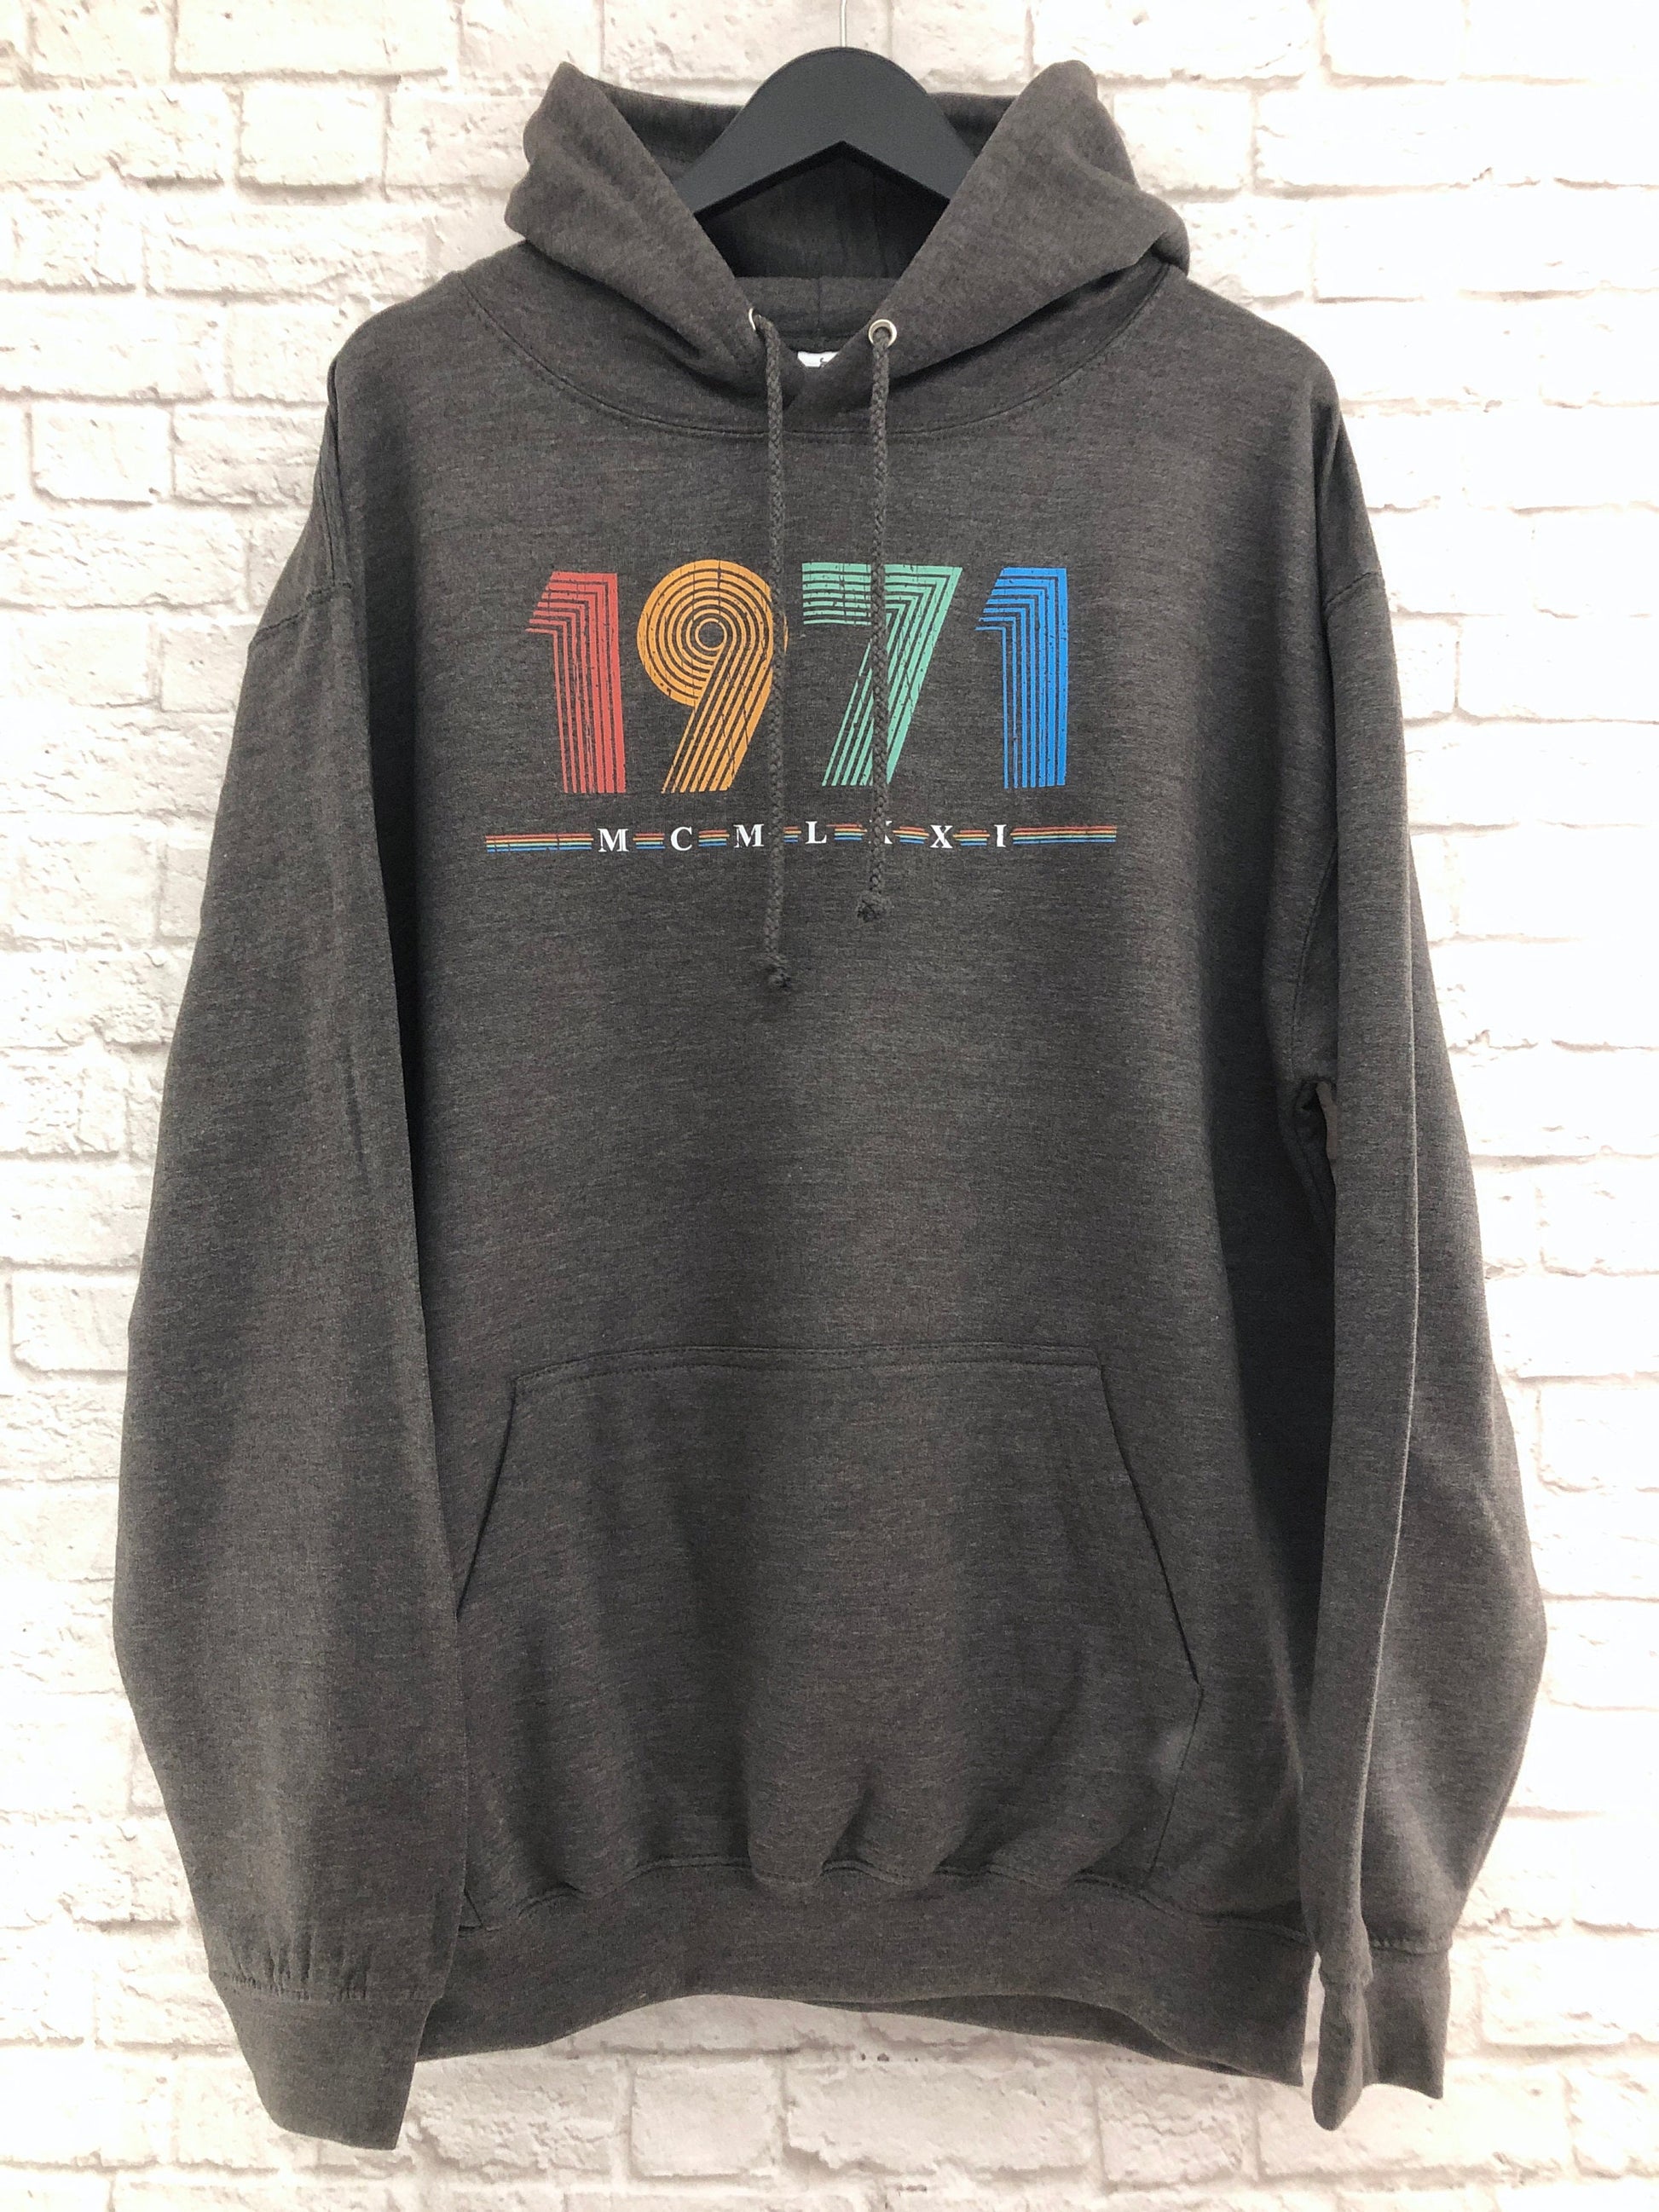 1971 Hoodie, 51st Birthday Gift Hooded Sweatshirt in Retro & Vintage 70s style, MCMLXXI Fiftieth Bday Hoody Sweat Shirt Top For Men or Women